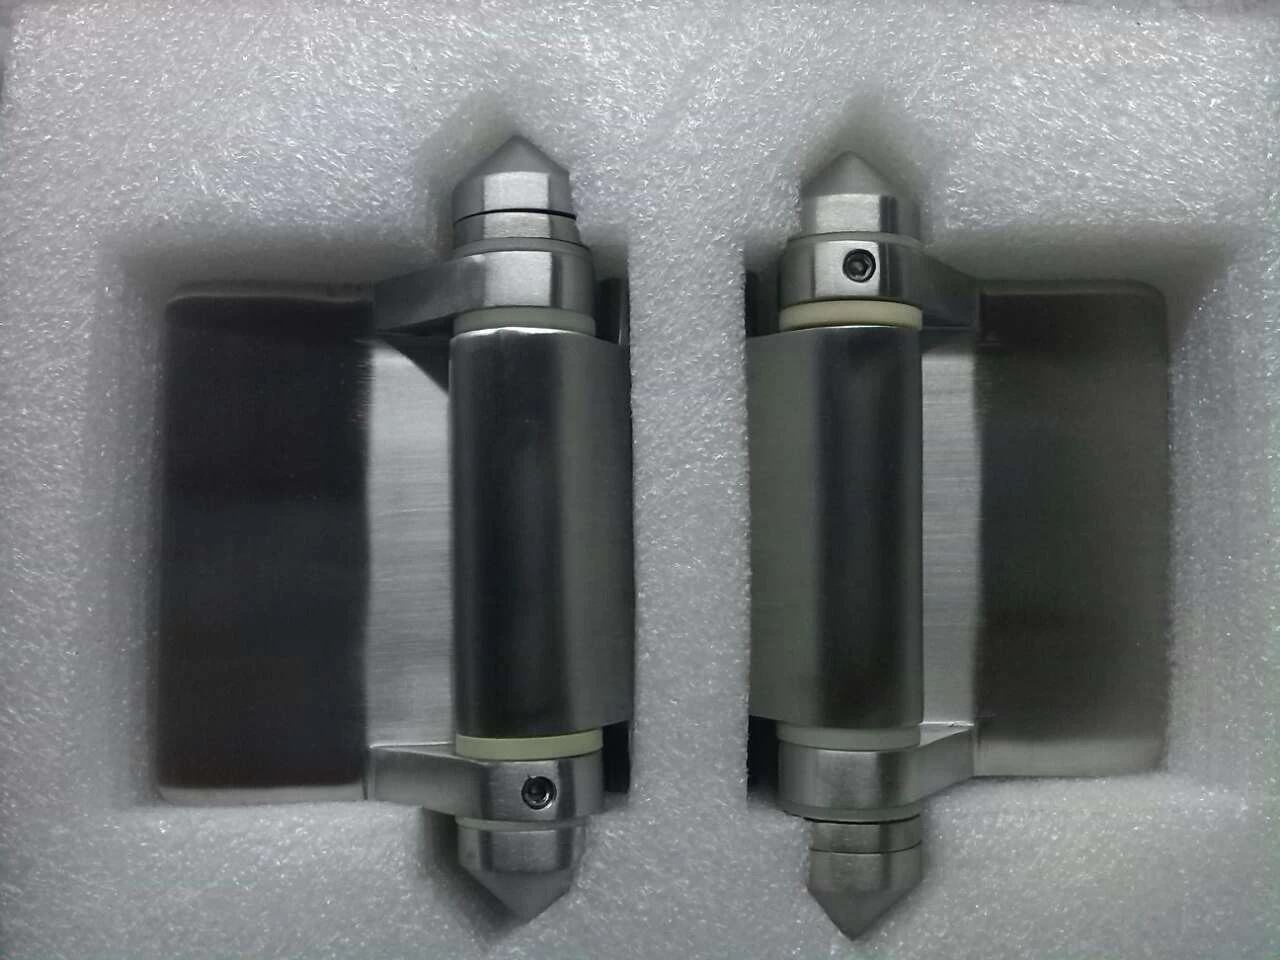 Stainless steel 316 glass to glass door hinges for pool